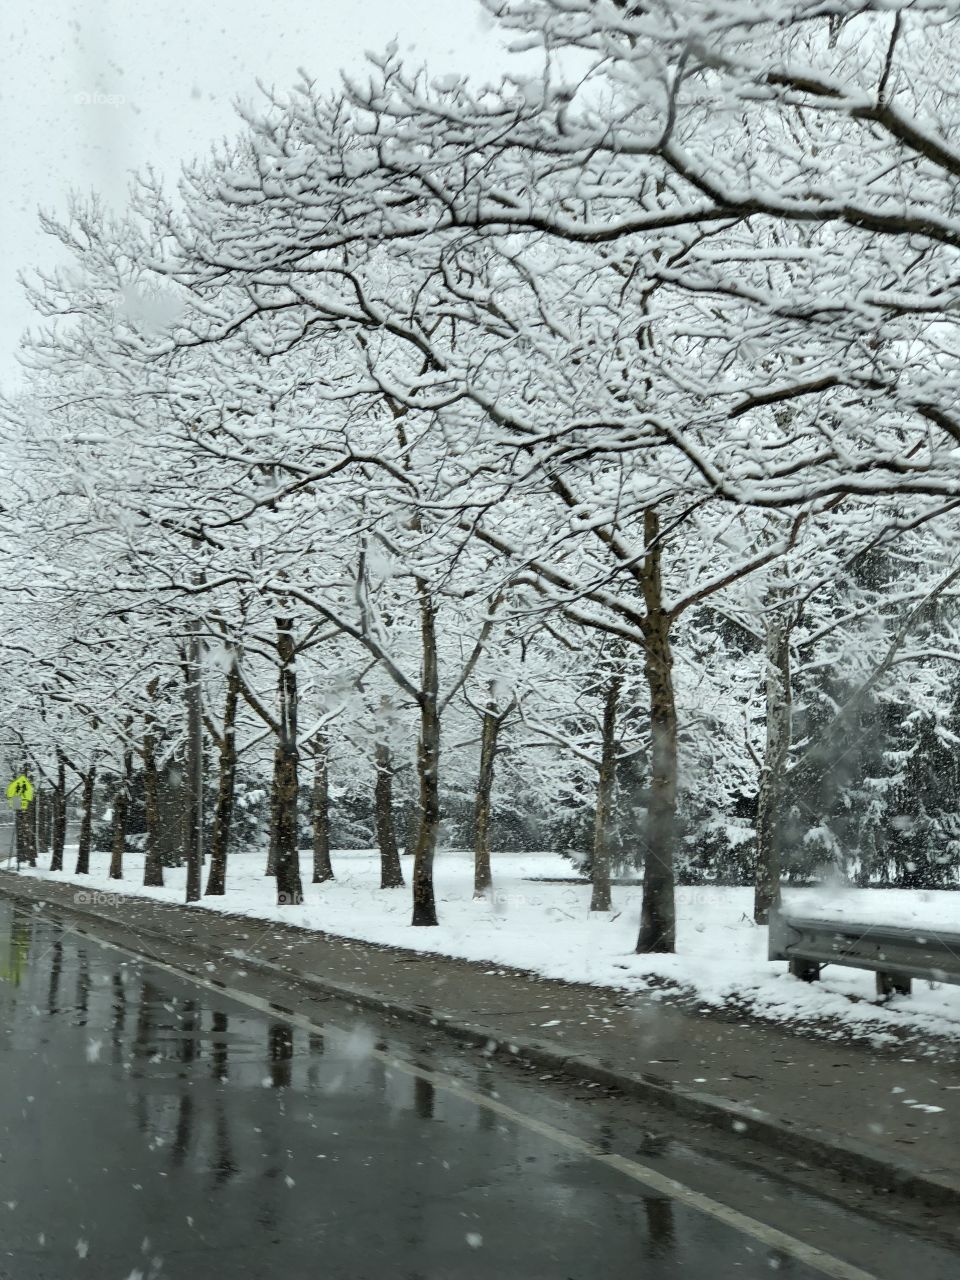 Snowcovered trees/branches line the street of Roger Williams Park, during surprise Spring snowstorm in Rhode Island (April 2018.) Weather Forecast had incorrectly predicted light flurries + rain, but what ensued left a fresh WinterWonderland.